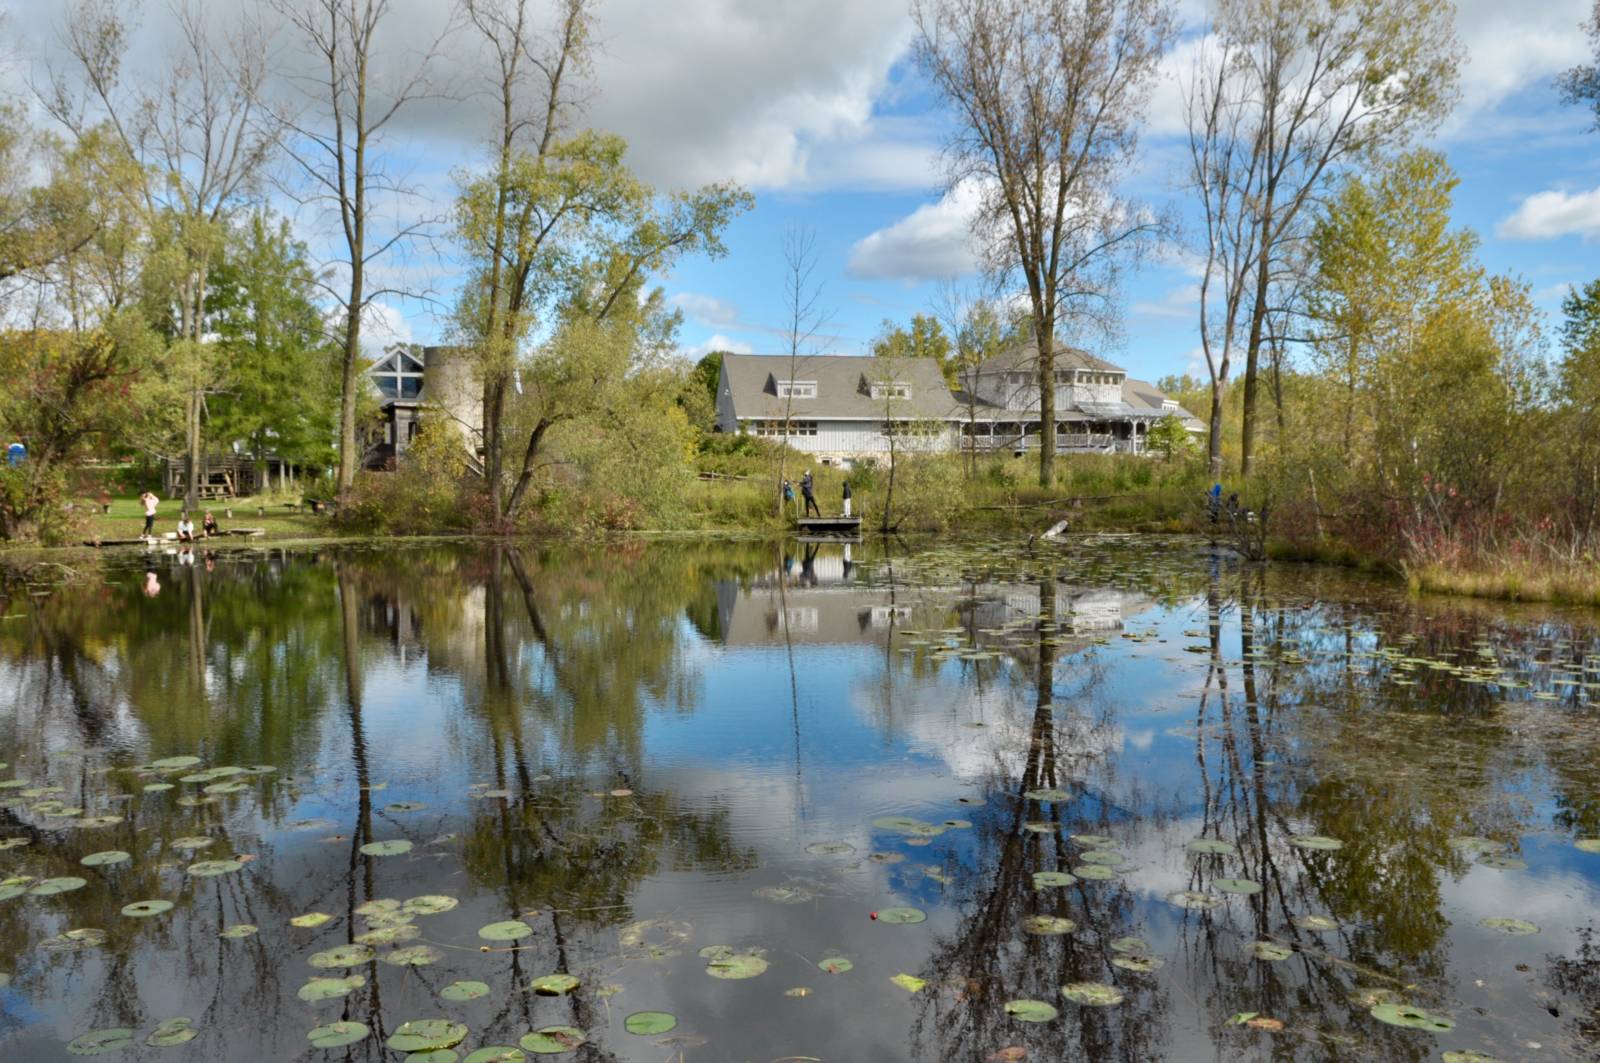 scenic view of farmer's pond at Riveredge with the sky reflecting off the water surface. The Riveredge Visitor Center is in the background with trees and plants.